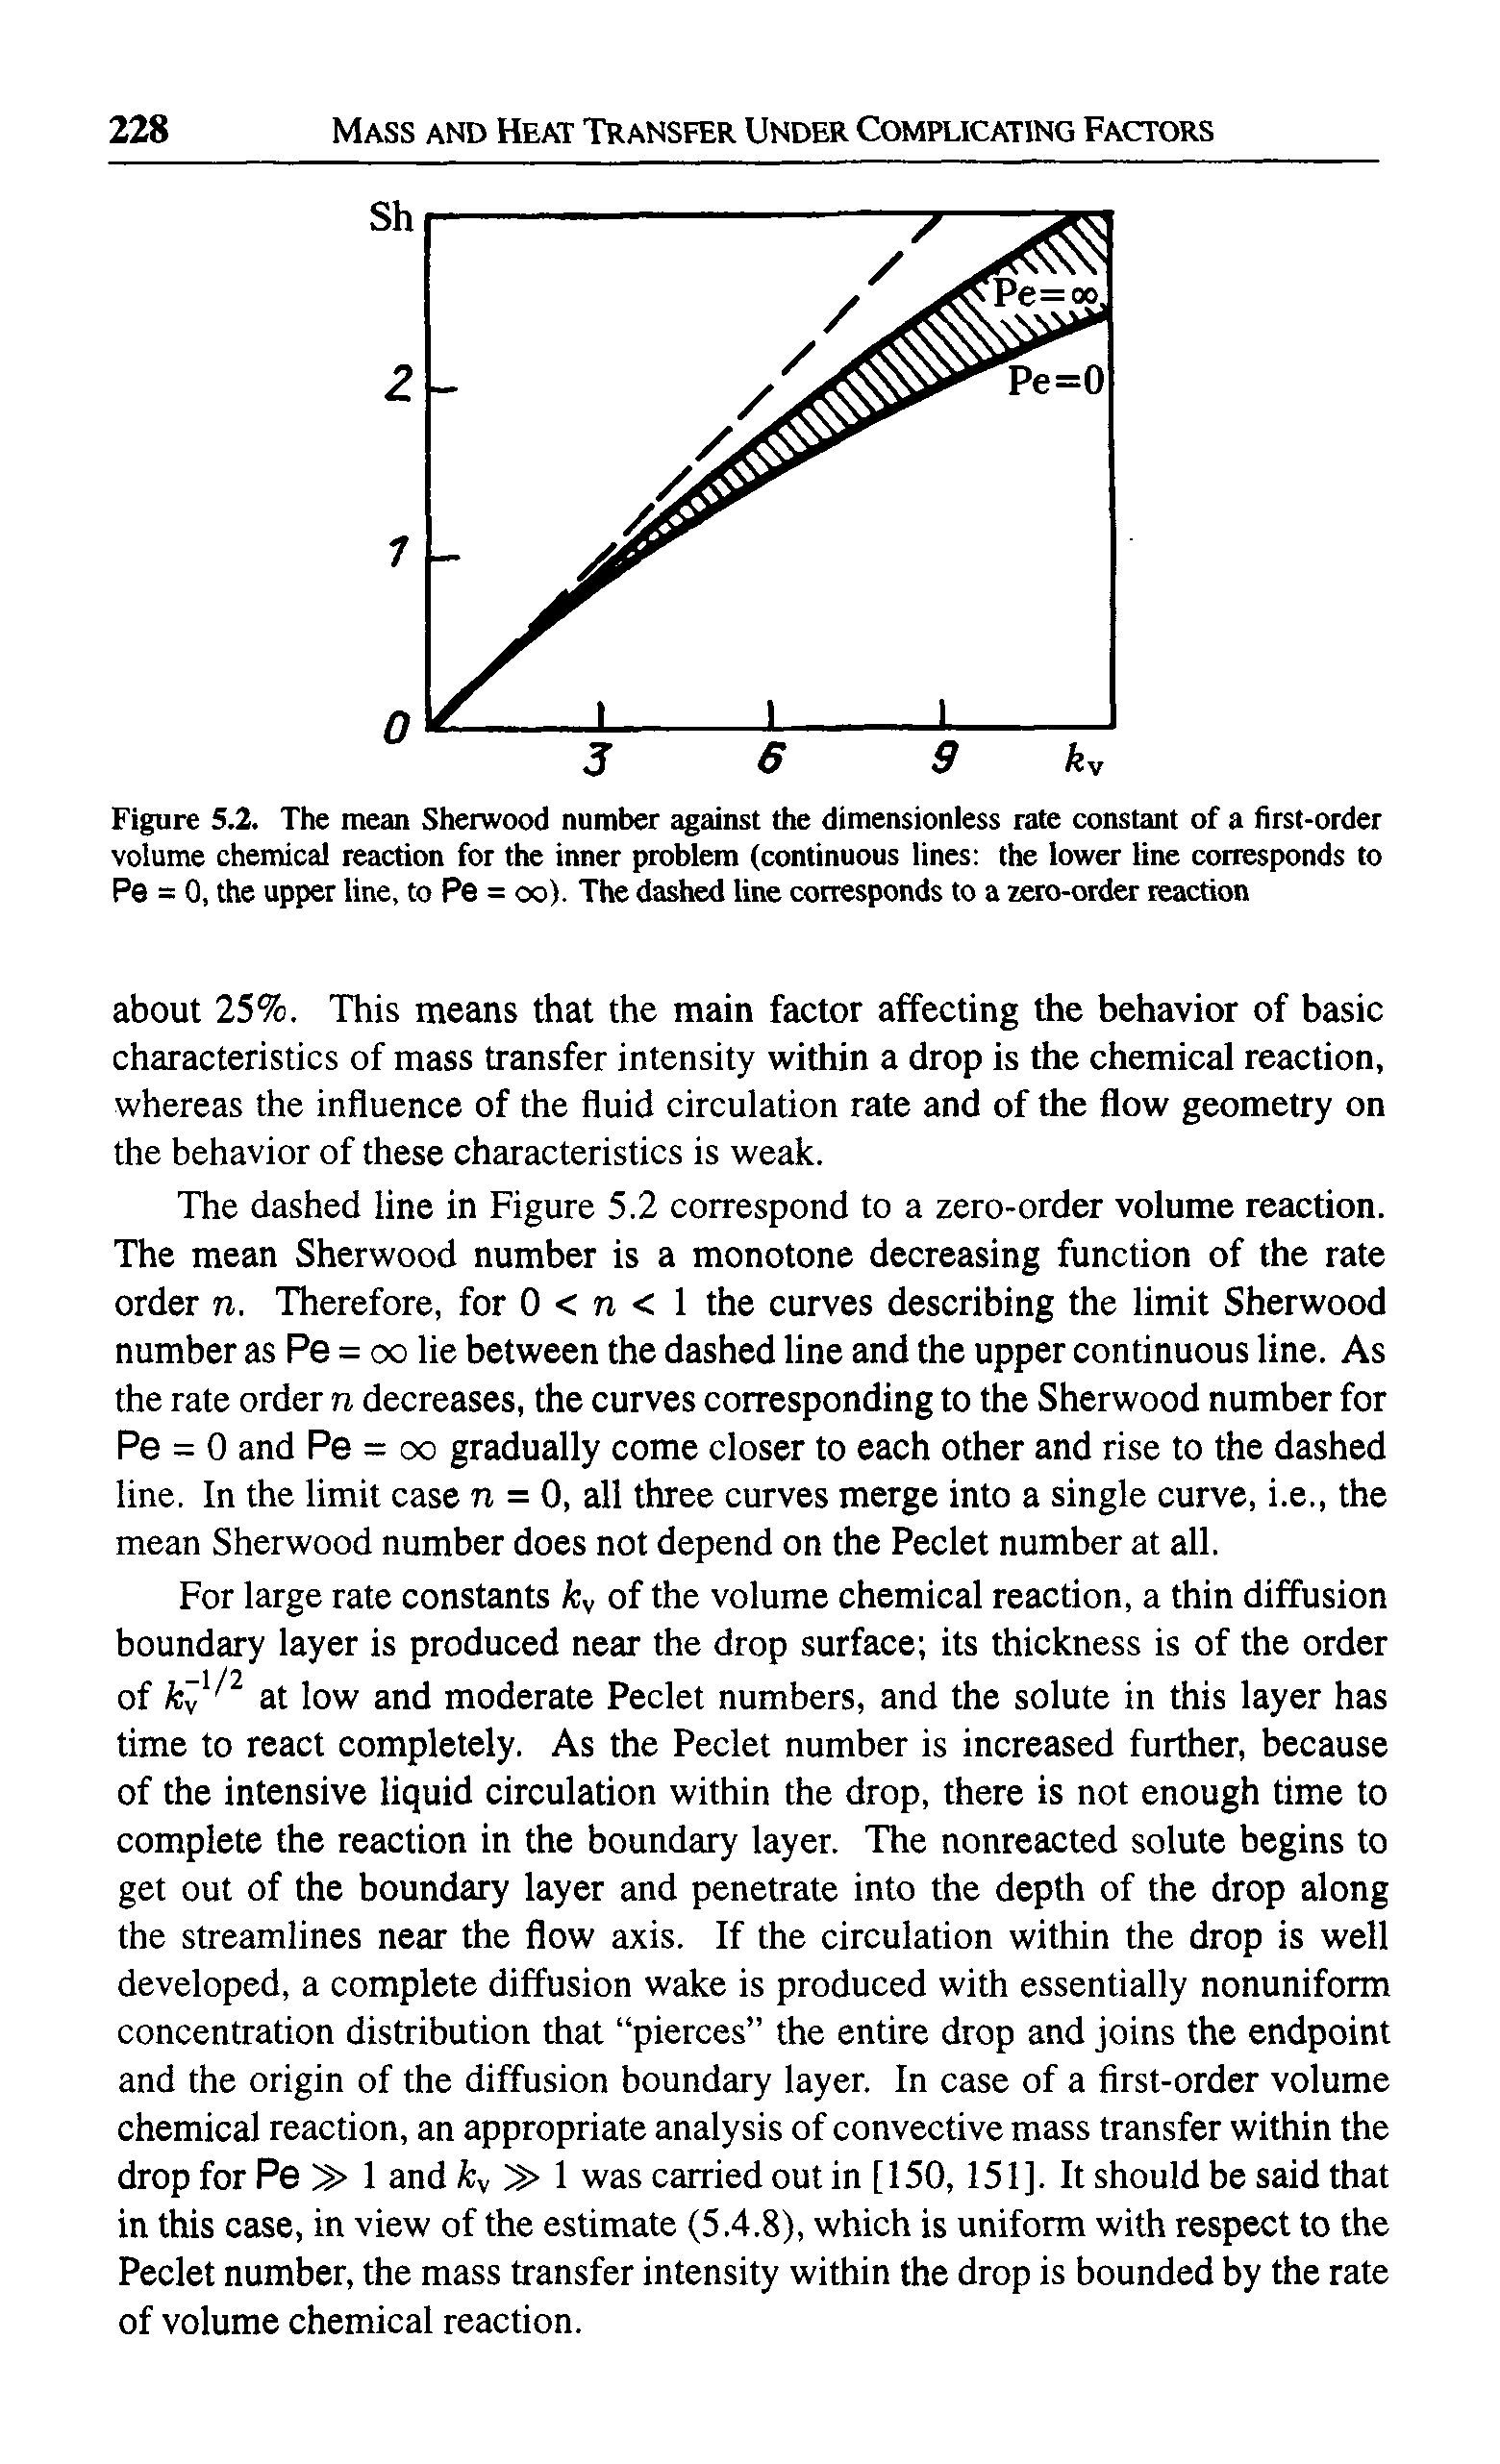 Figure 5.2. The mean Sherwood number against the dimensionless rate constant of a first-order volume chemical reaction for the inner problem (continuous lines the lower line corresponds to Pe = 0, the upper line, to Pe = oo). The dashed line corresponds to a zero-order reaction...